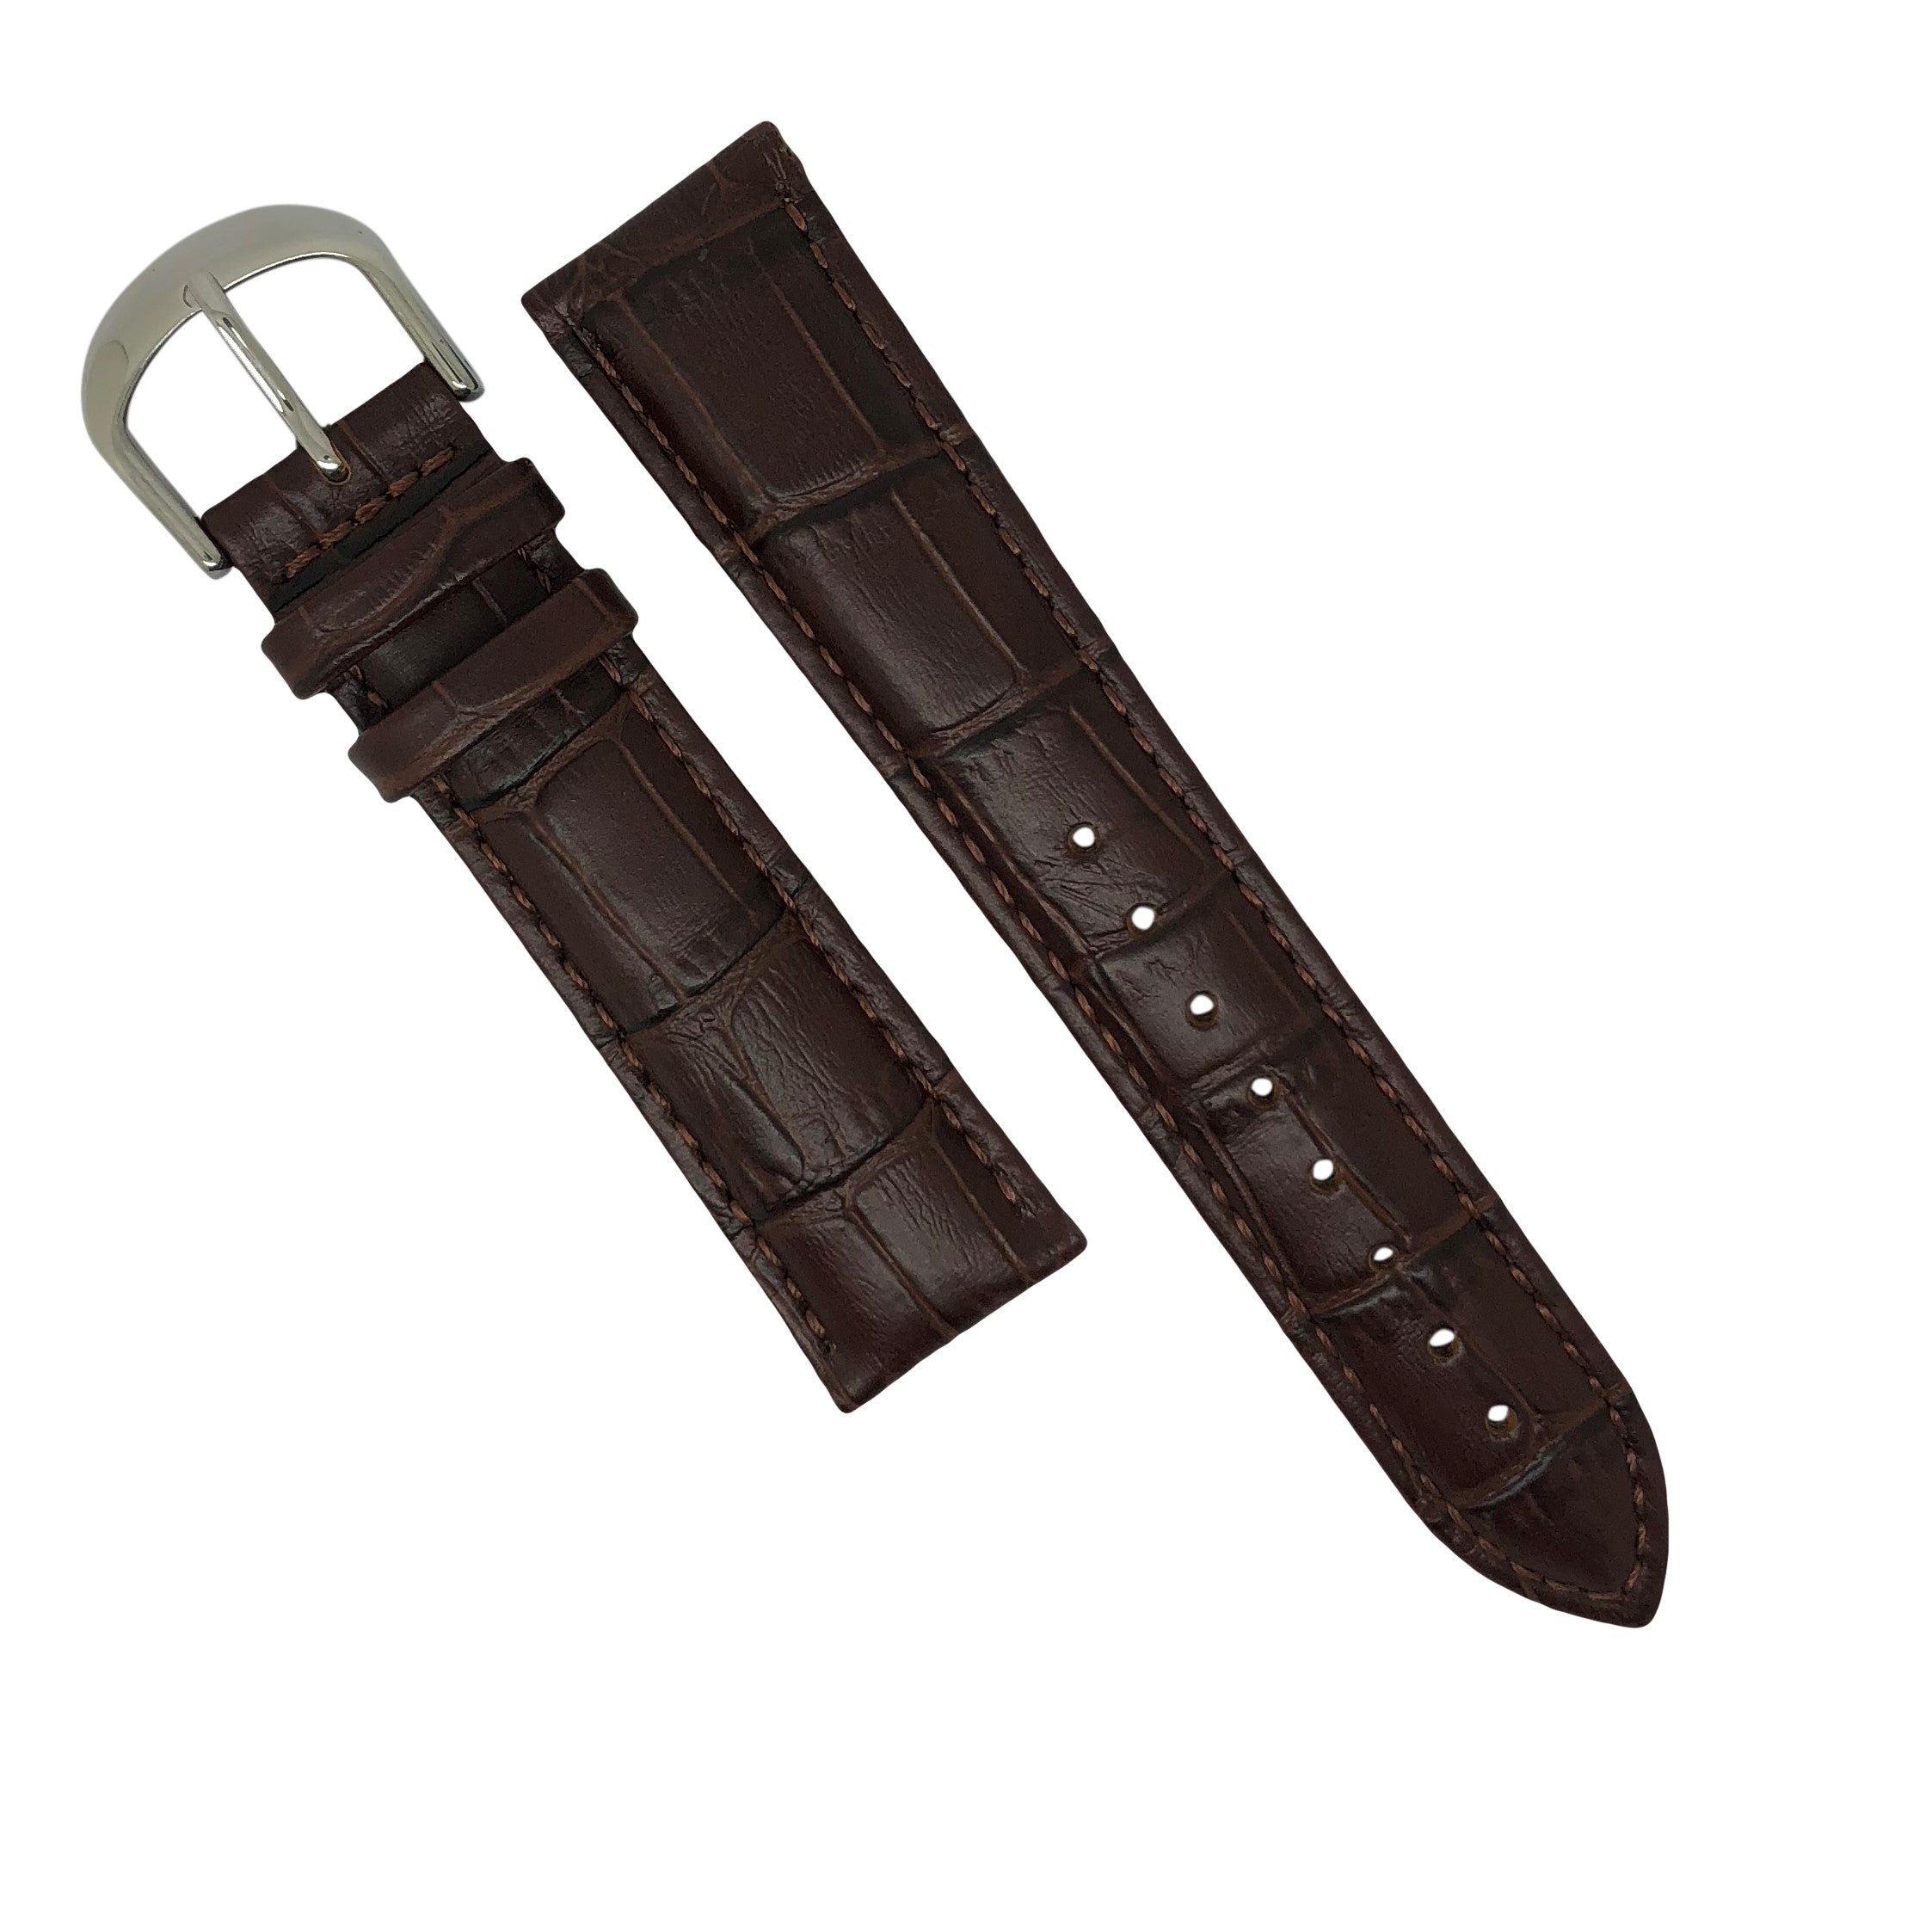 Genuine Croc Pattern Stitched Leather Watch Strap in Brown with Silver Buckle (12mm) - Nomad Watch Works Malaysia